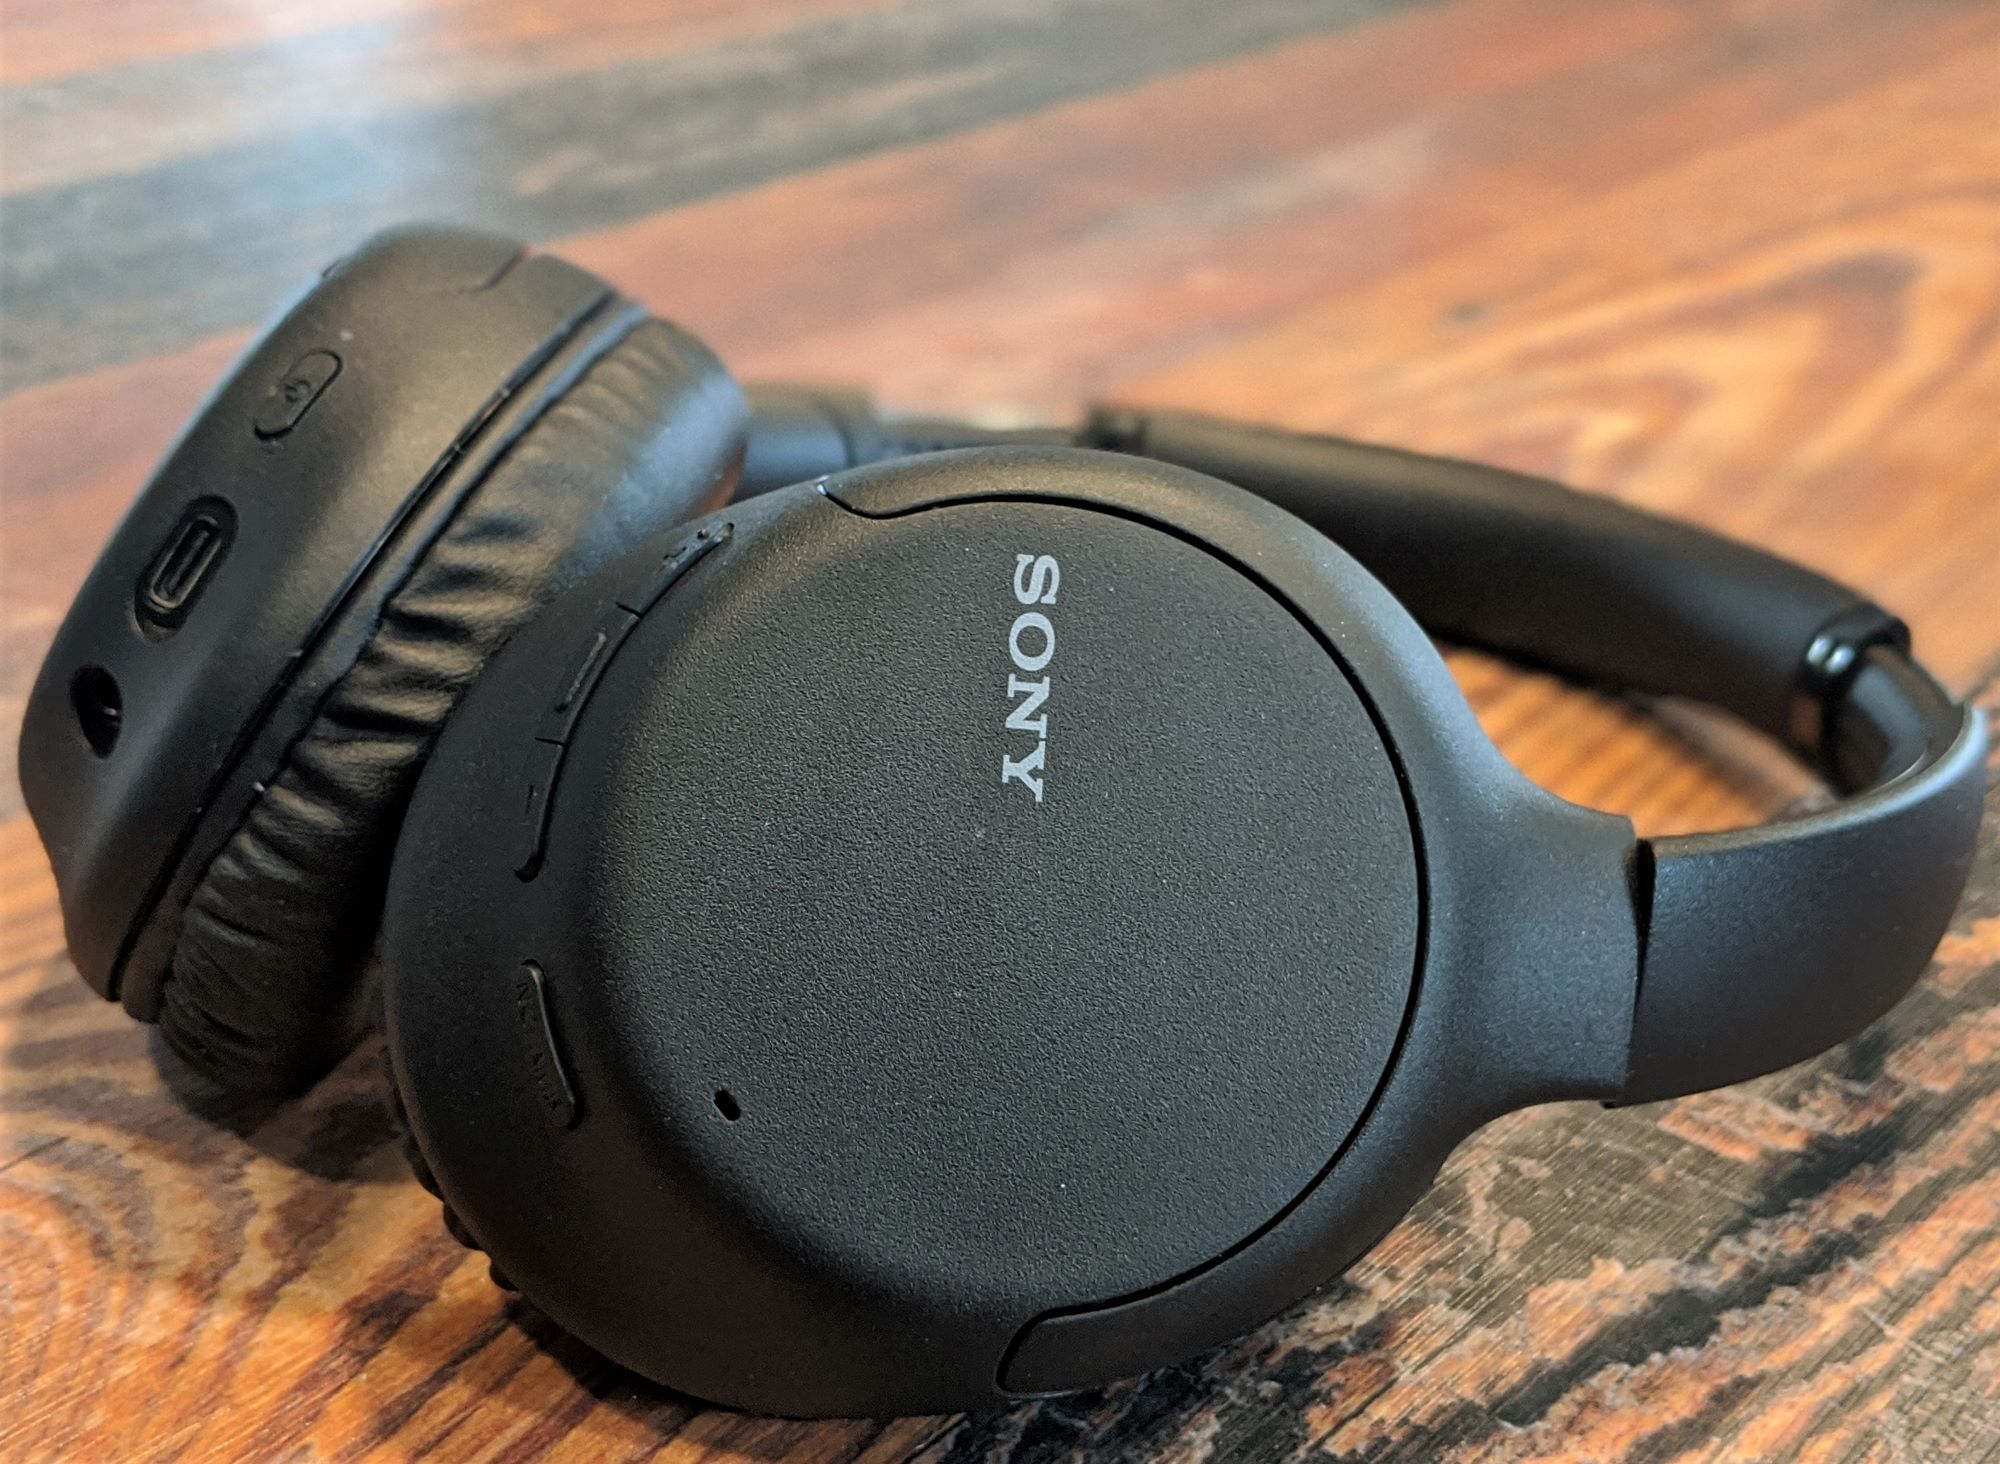 Sony WH-CH710N Active Noise Cancelling Wireless Headphones